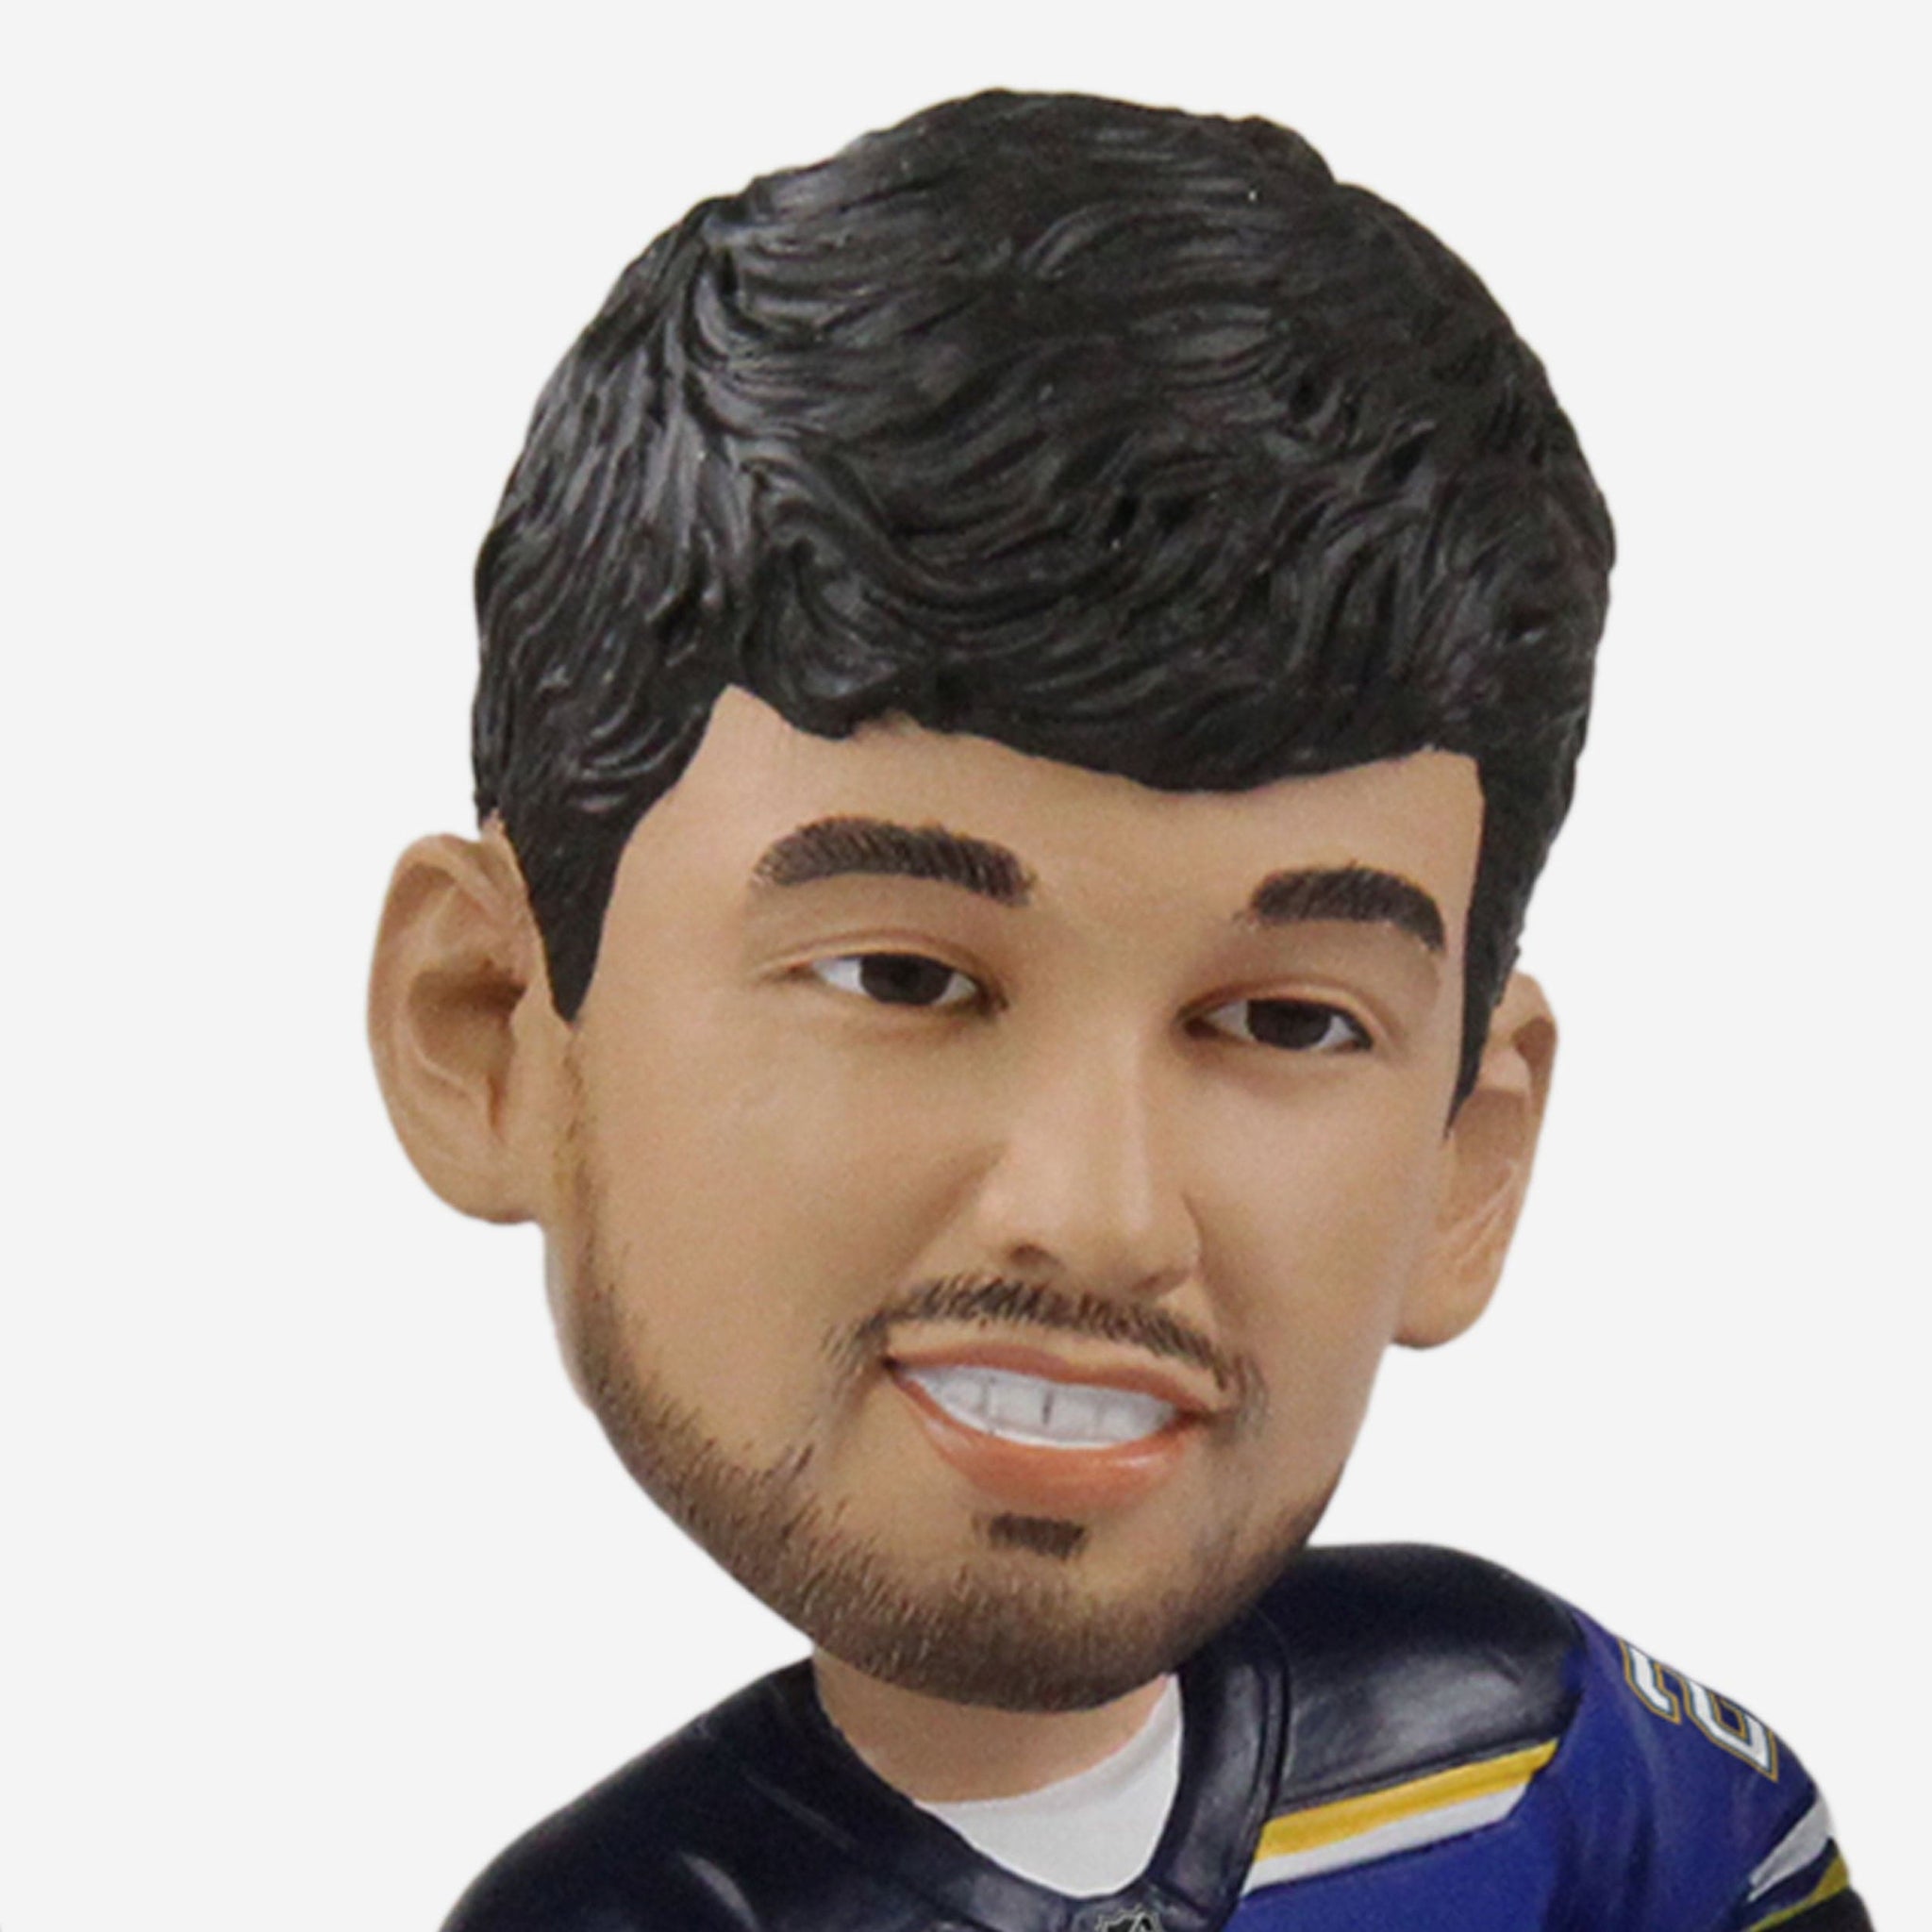 St. Louis Blues Louie New Year's Mascot Bobblehead - Collectible Bobbleheads  by Kollectico